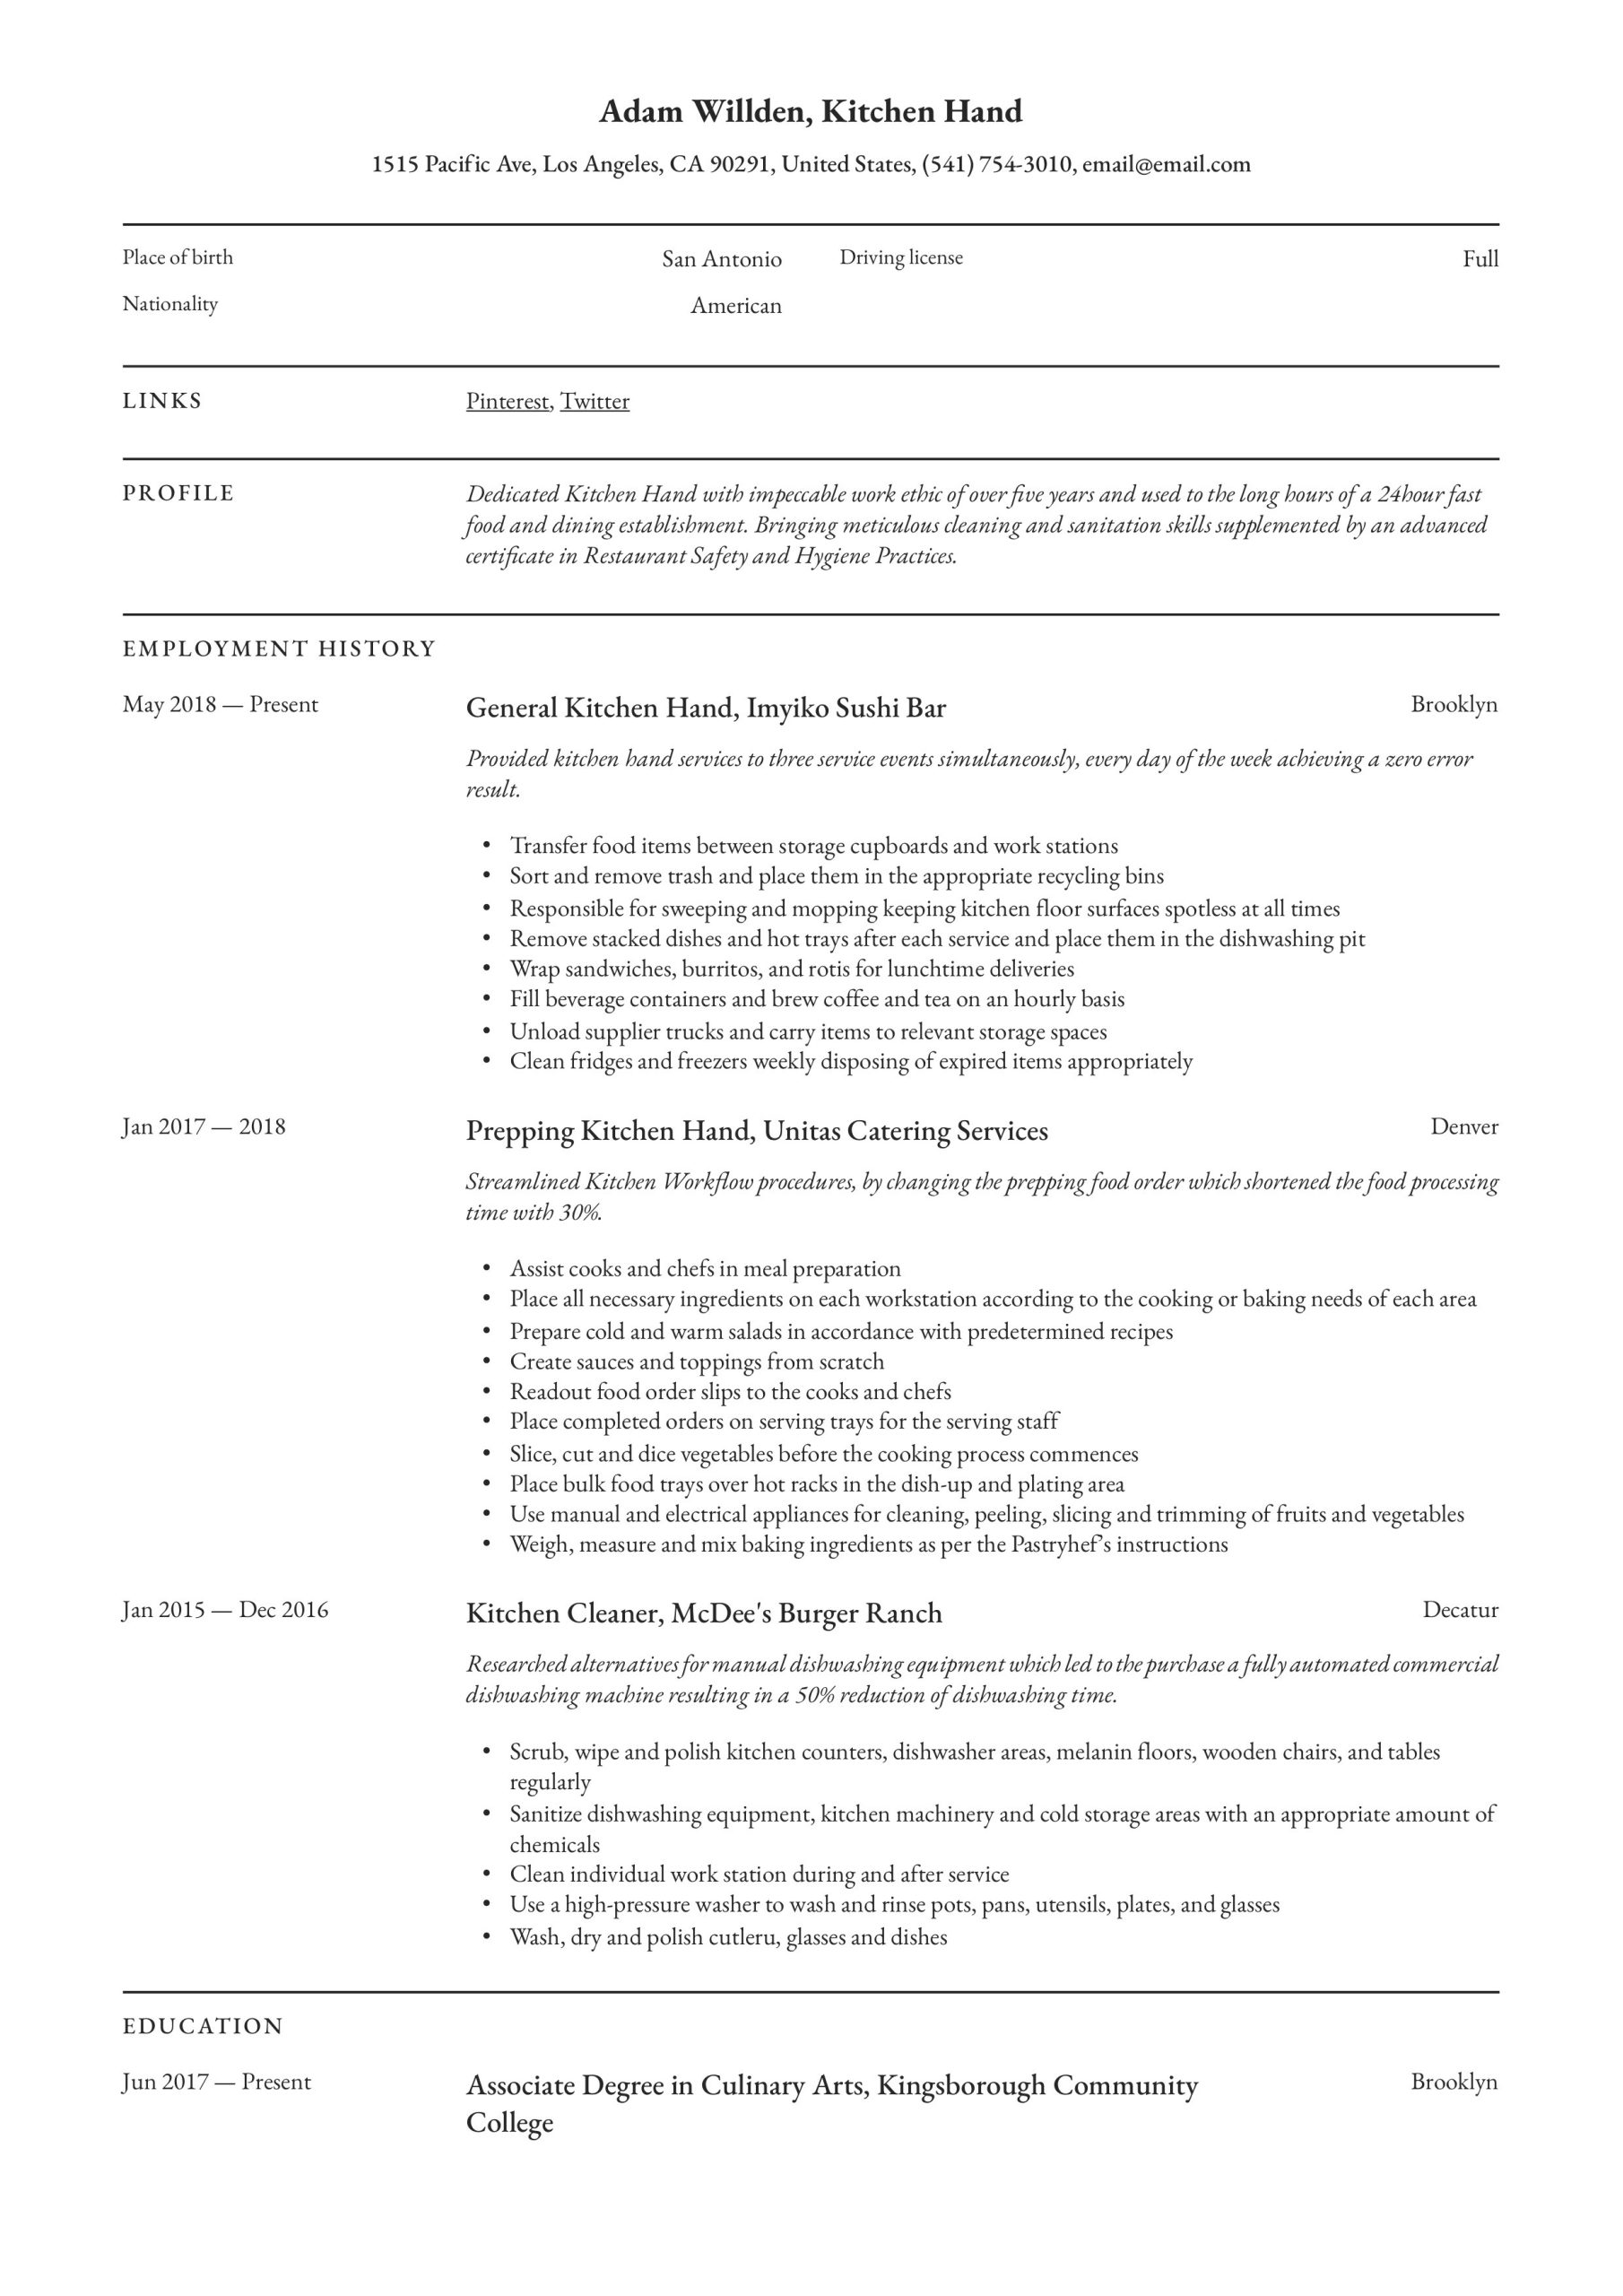 Volunteer Experience at soup Kitchen Resume Sample Kitchen Hand Resume & Writing Guide  12 Free Templates 2020